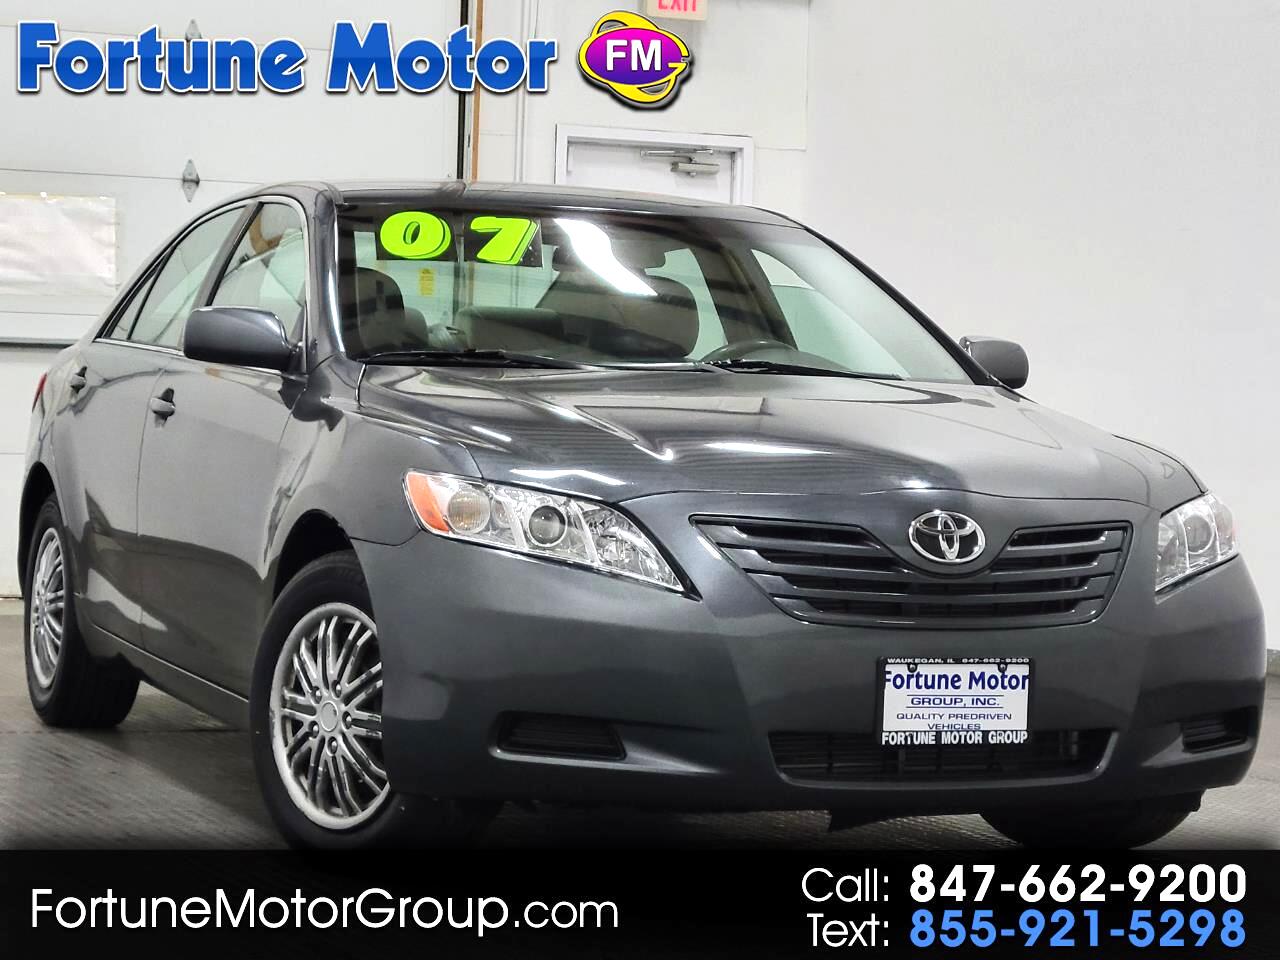 2007 Toyota Camry 4dr Sdn I4 Man LE (Natl)